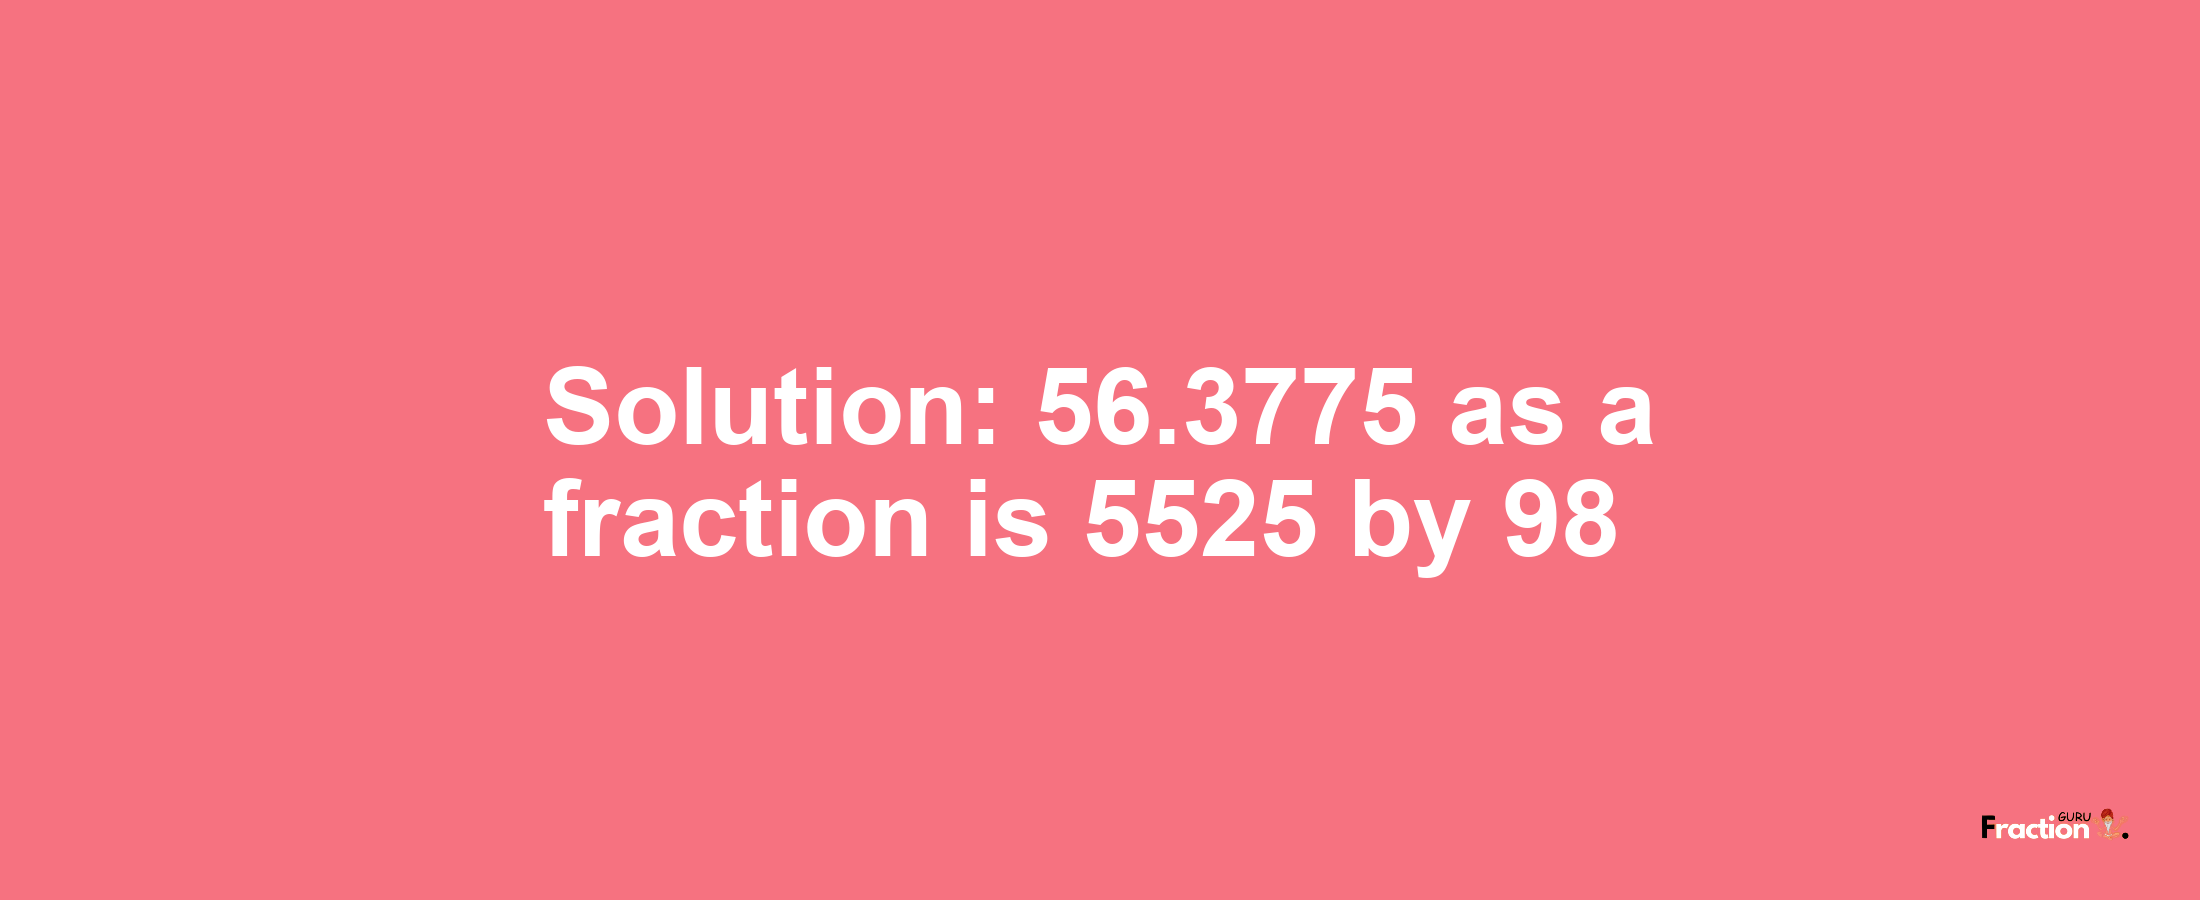 Solution:56.3775 as a fraction is 5525/98